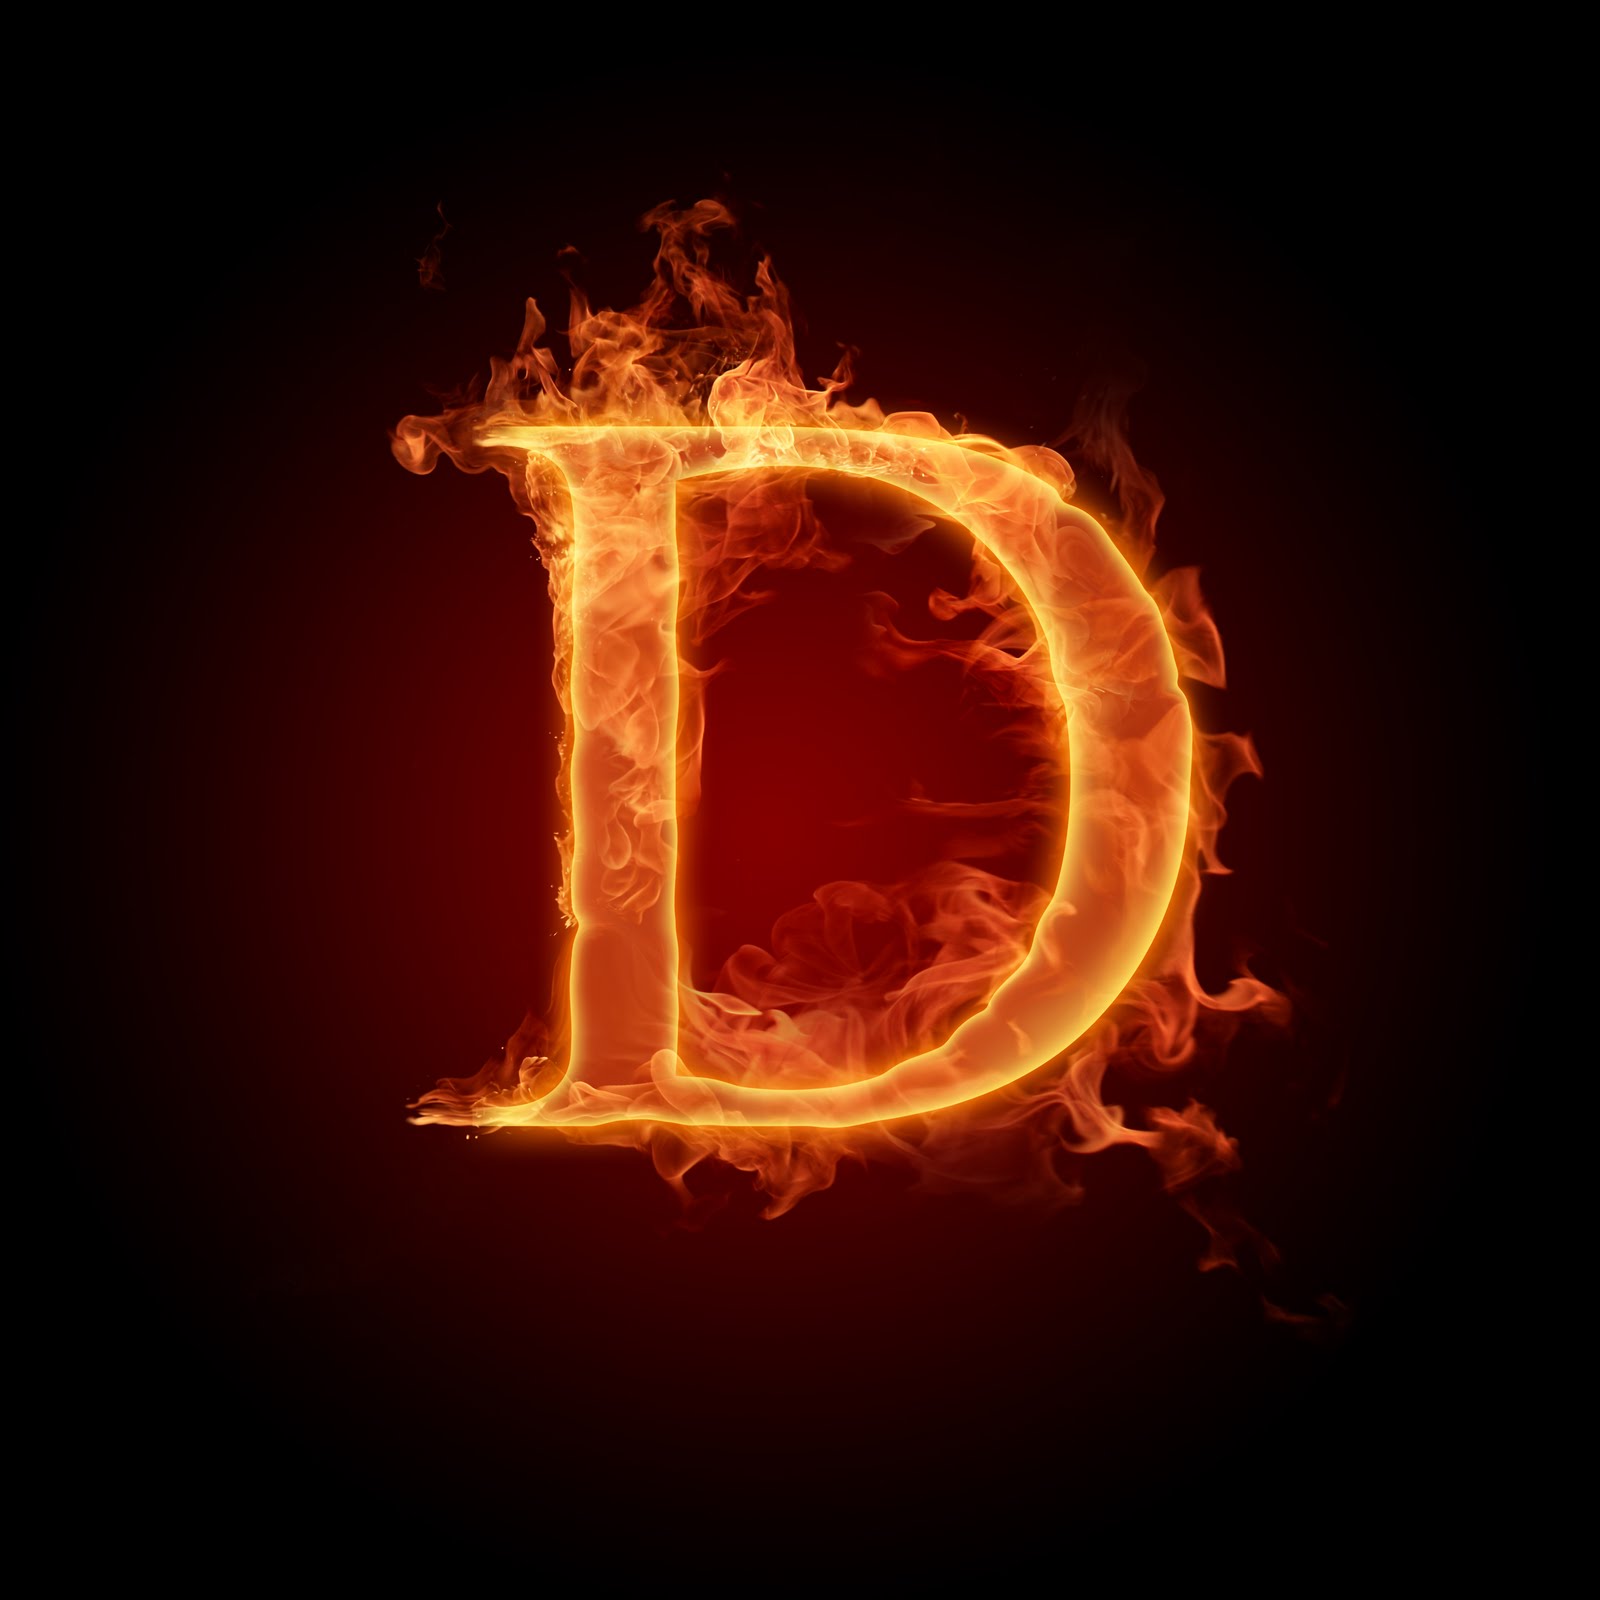 coolbestpics: Fire letters and alphabets